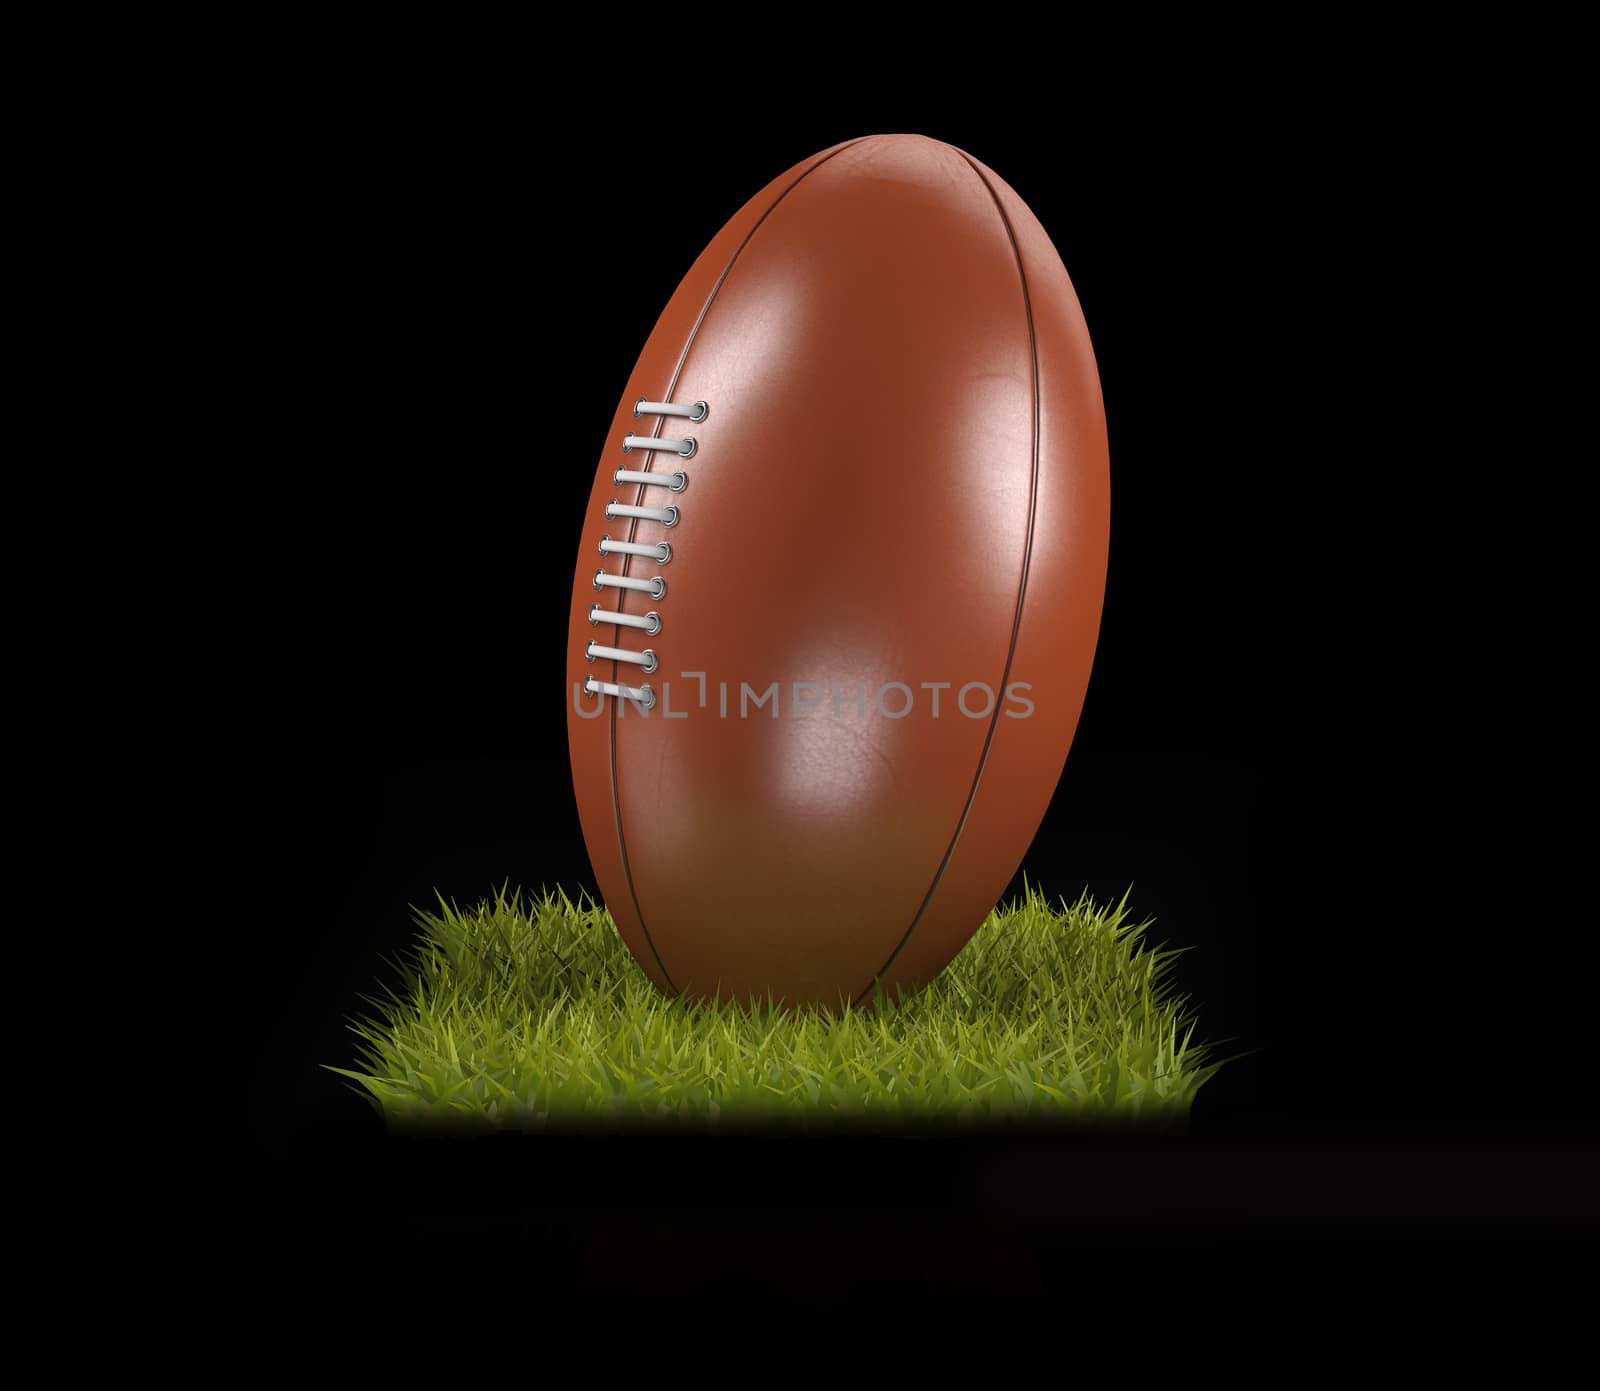 3D Rendering of a Rugby Ball on the grass.